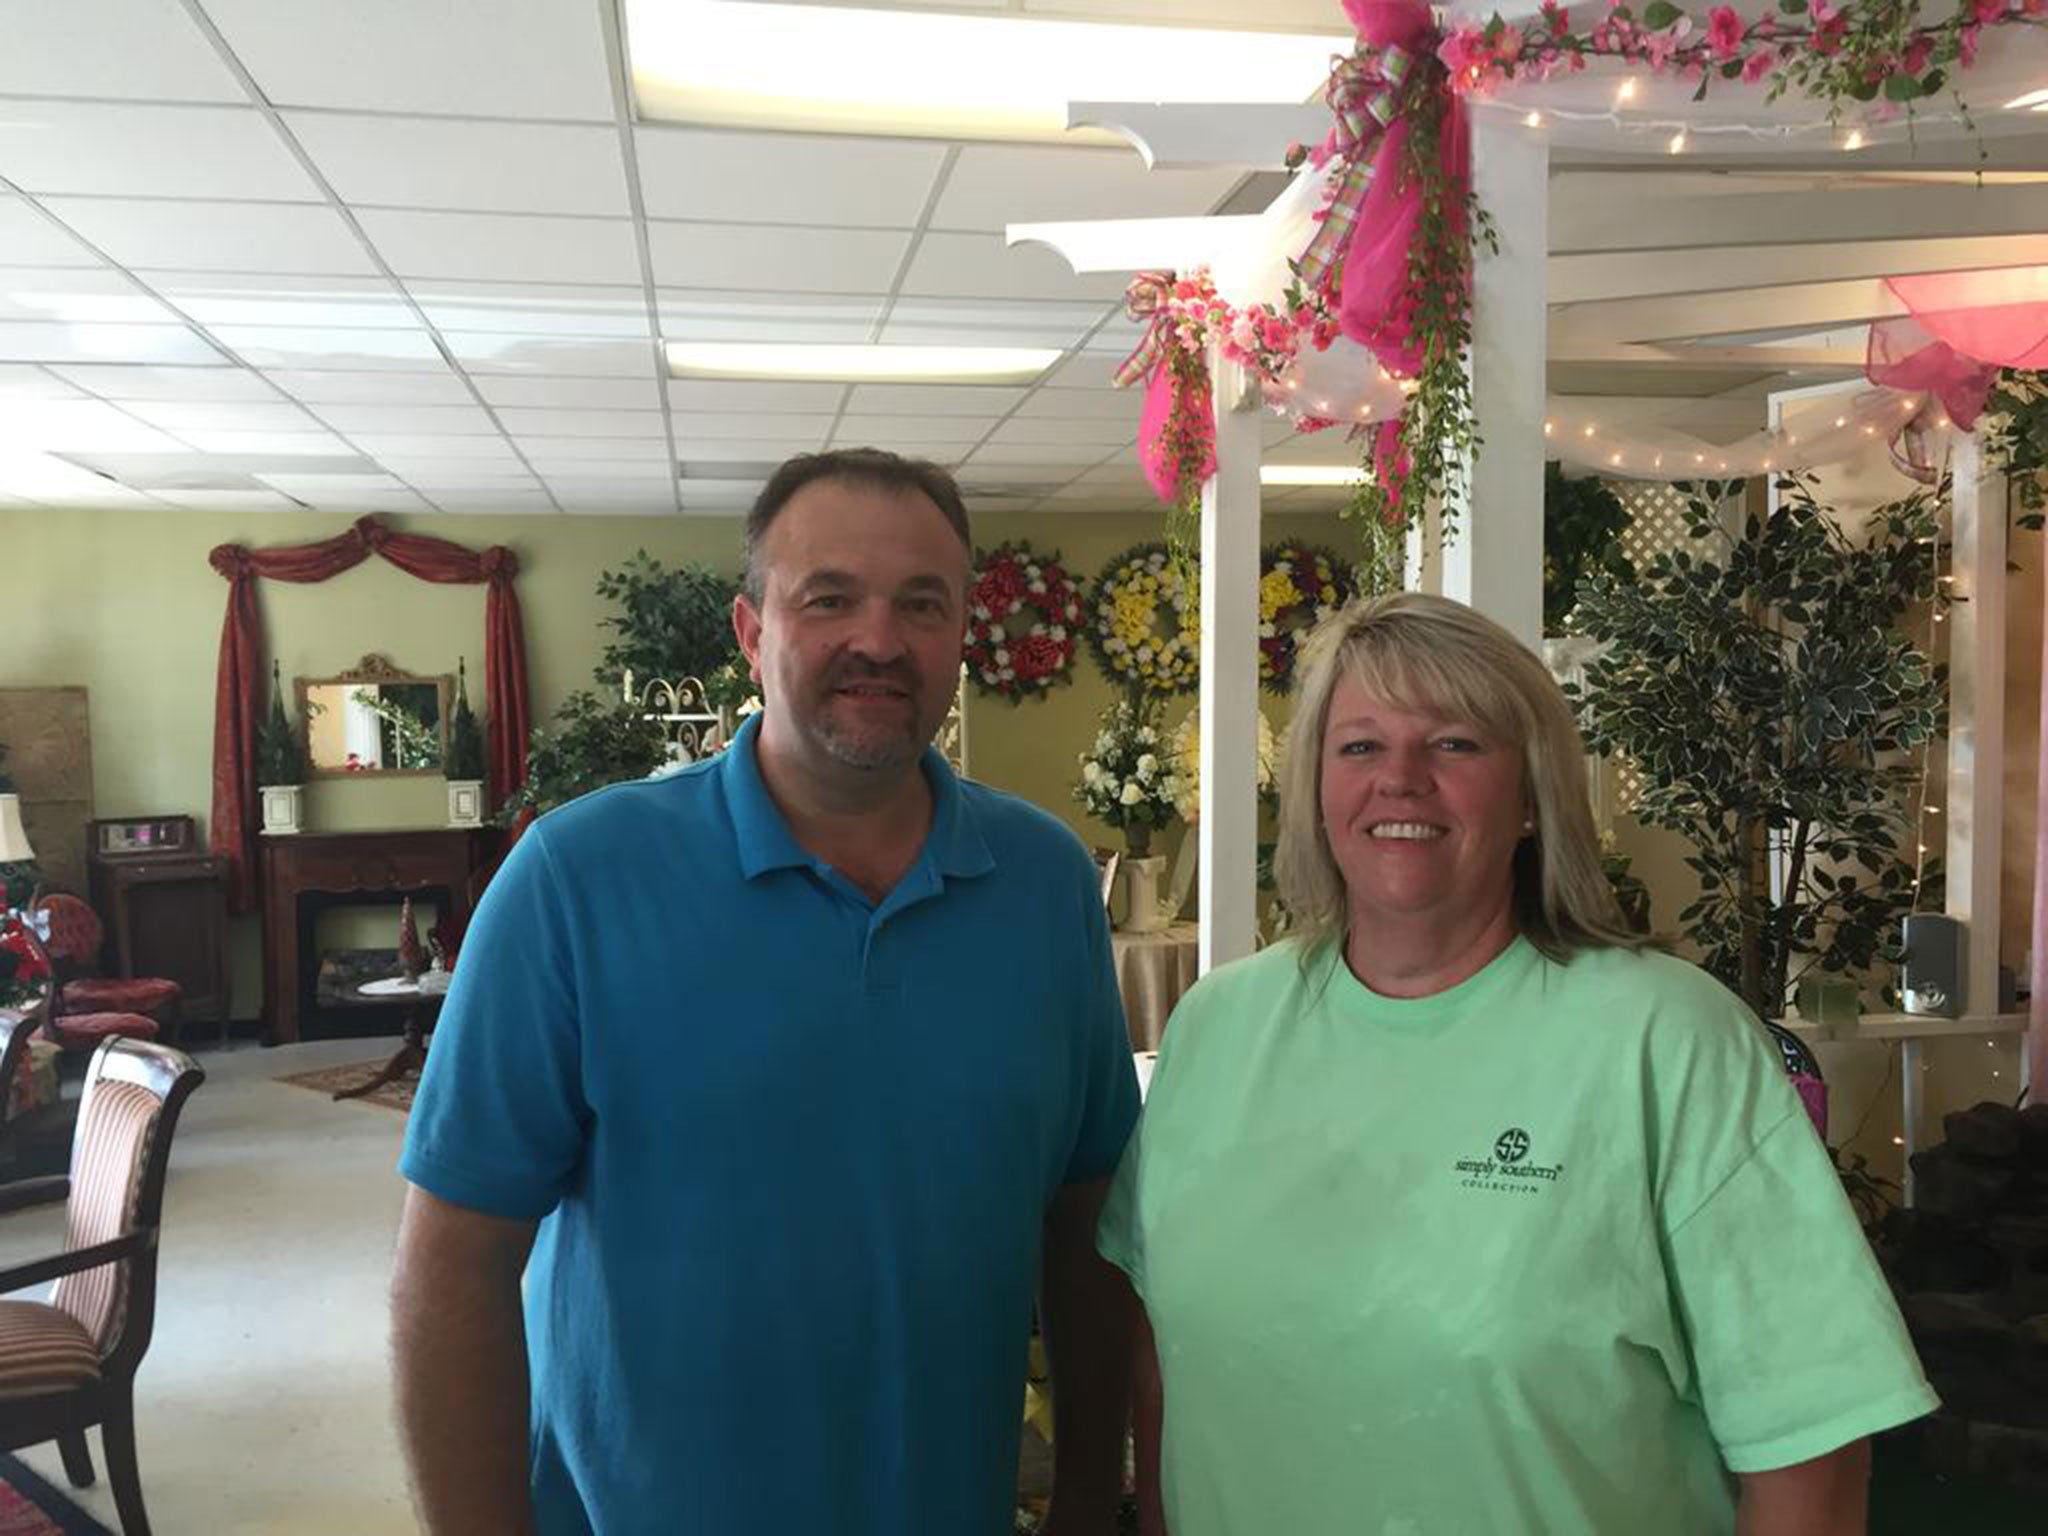 North Carolina florists Todd Frady and Debbie Dills. Debbie trailed Charleston shooting suspect Dylann Roof and alerted police, while driving to work